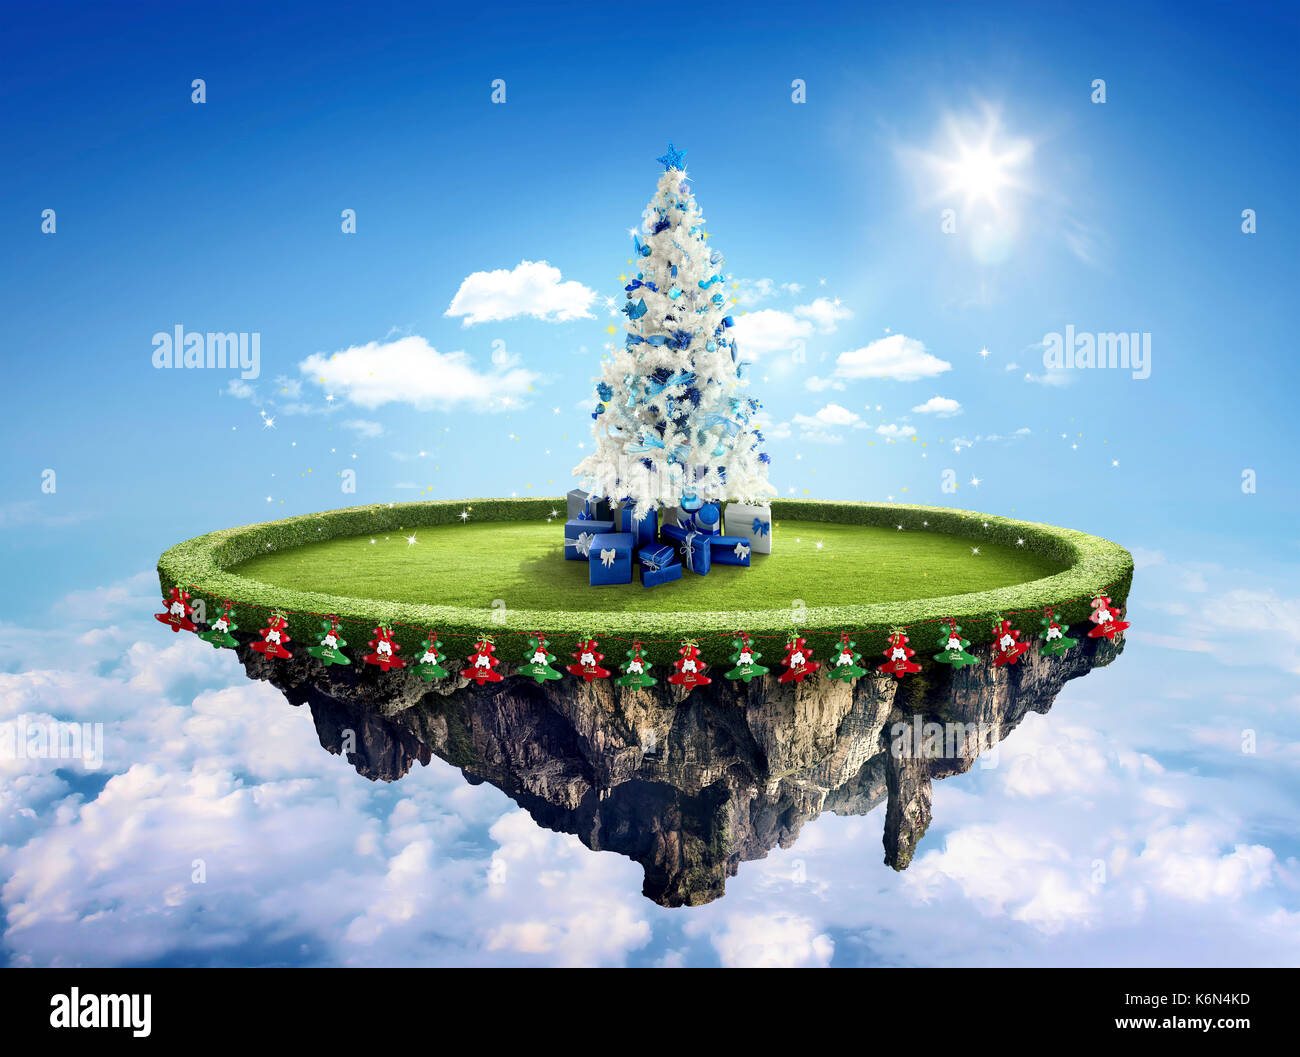 Amazing fantasy scenery with floating islands with white Christmas tree, hot balloons and decoration Stock Photo